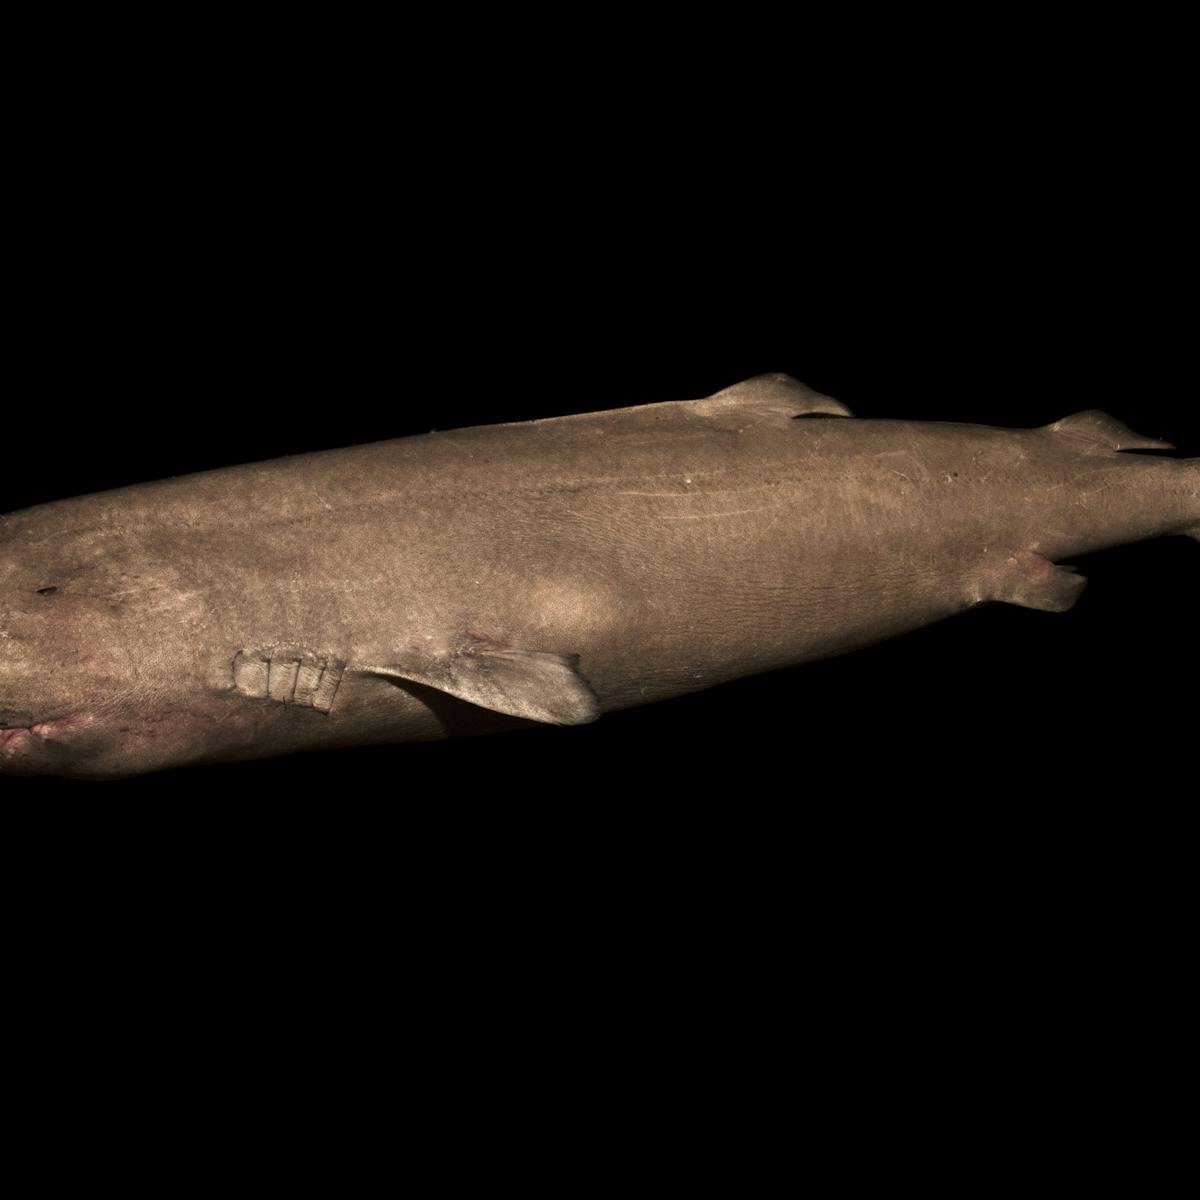 Meet 5 remarkably old animals, from a Greenland shark to a featherless,  seafaring cockatoo